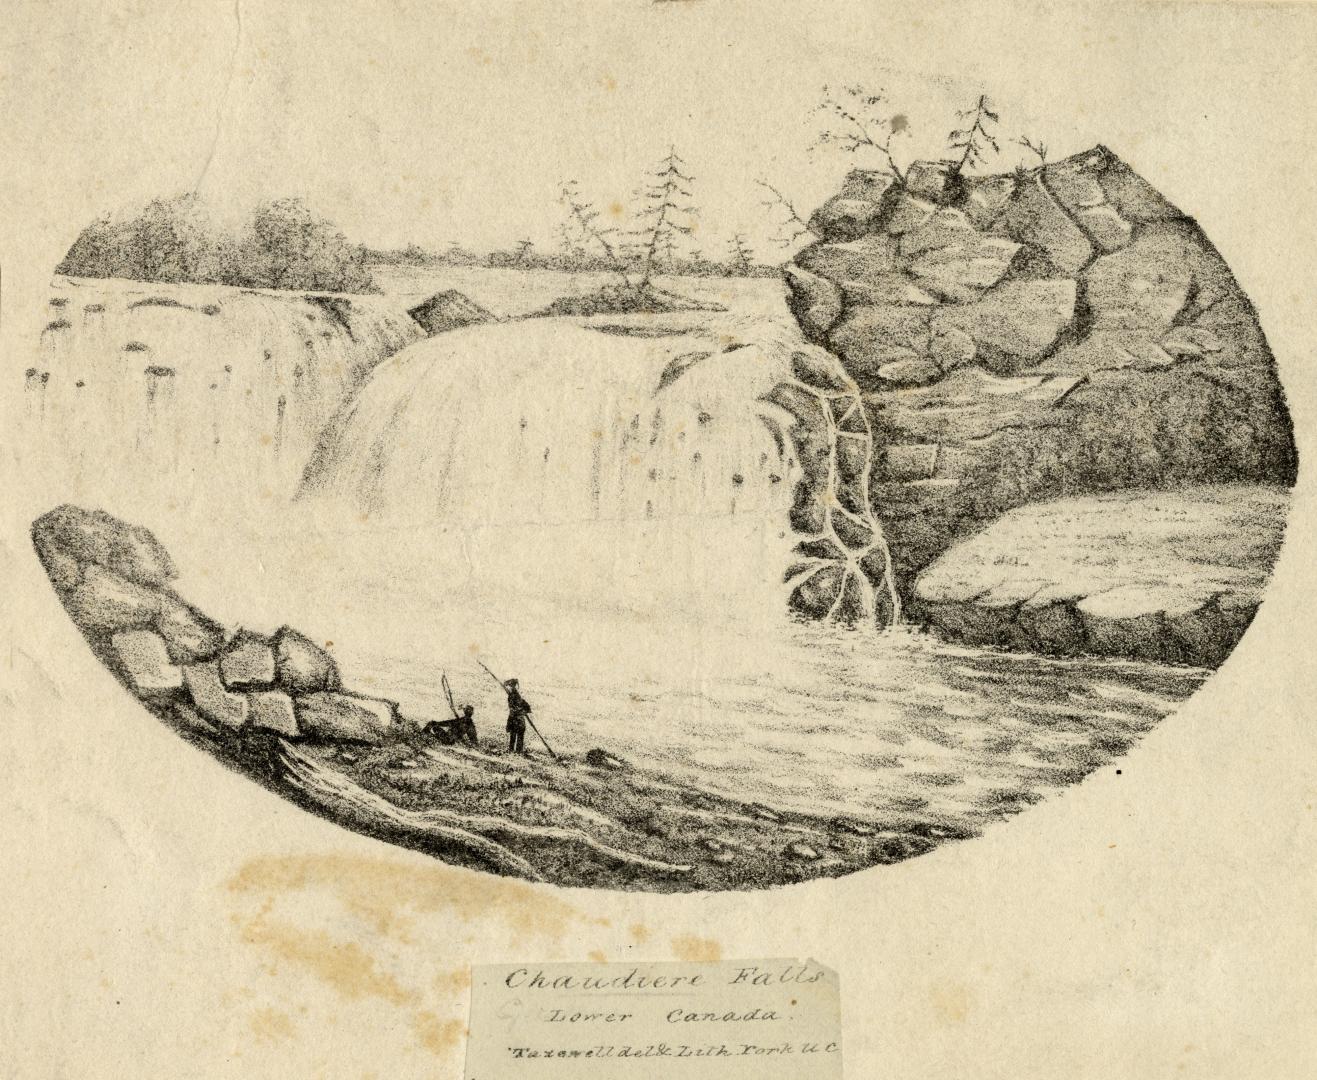 Chaudiere Falls, Lower Canada (Ottawa River, Ontario and Quebec)